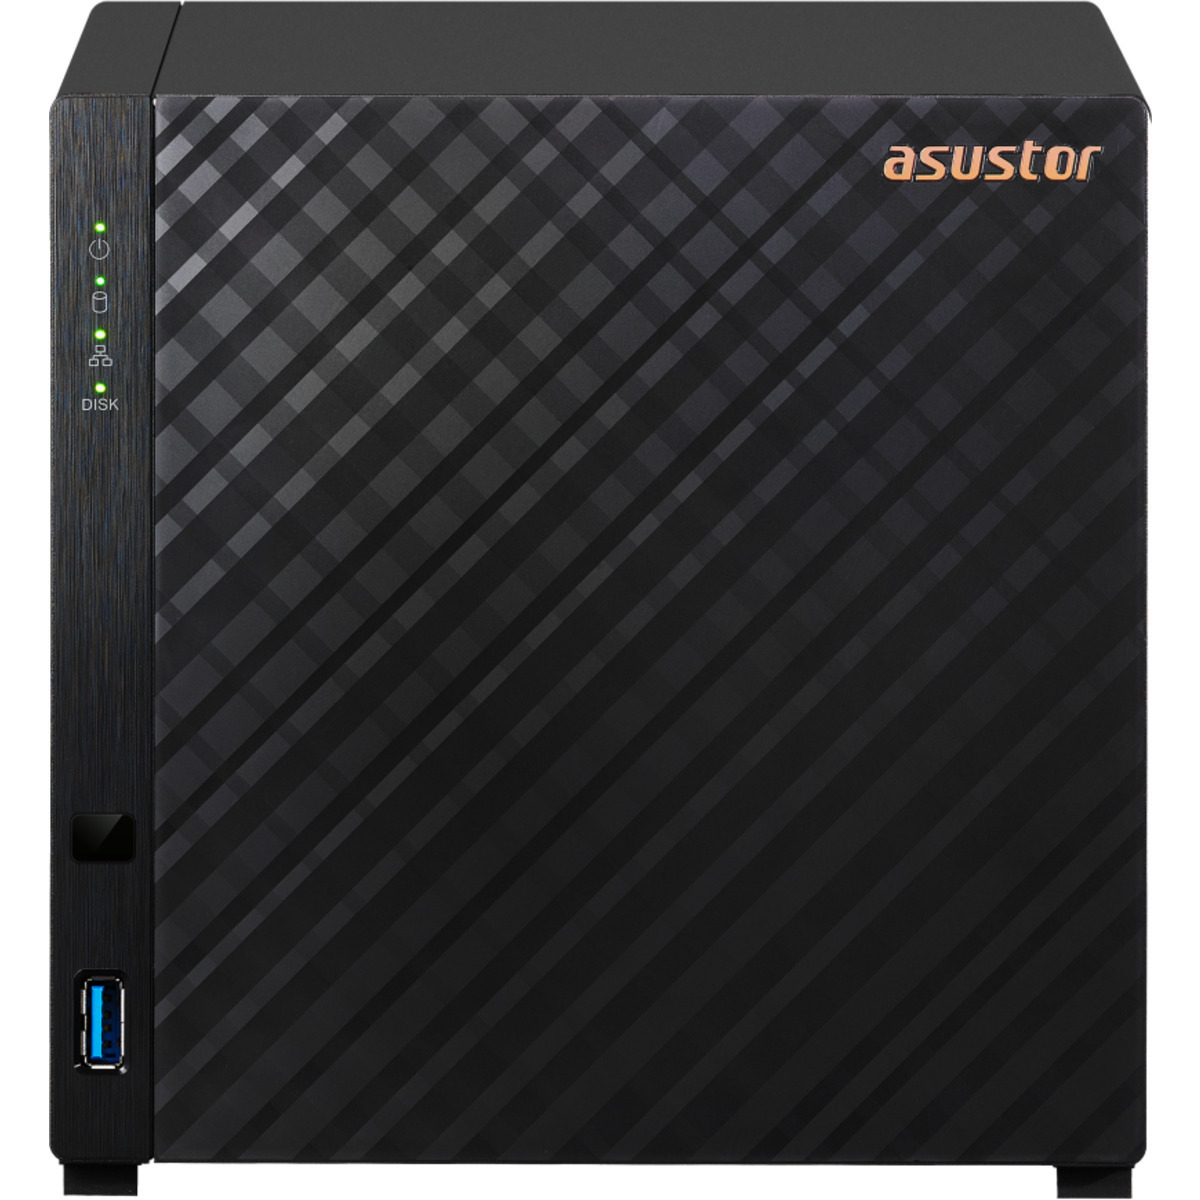 ASUSTOR DRIVESTOR 4 AS1104T 16tb 4-Bay Desktop Personal / Basic Home / Small Office NAS - Network Attached Storage Device 4x4tb Crucial MX500 CT4000MX500SSD1 2.5 560/510MB/s SATA 6Gb/s SSD CONSUMER Class Drives Installed - Burn-In Tested DRIVESTOR 4 AS1104T